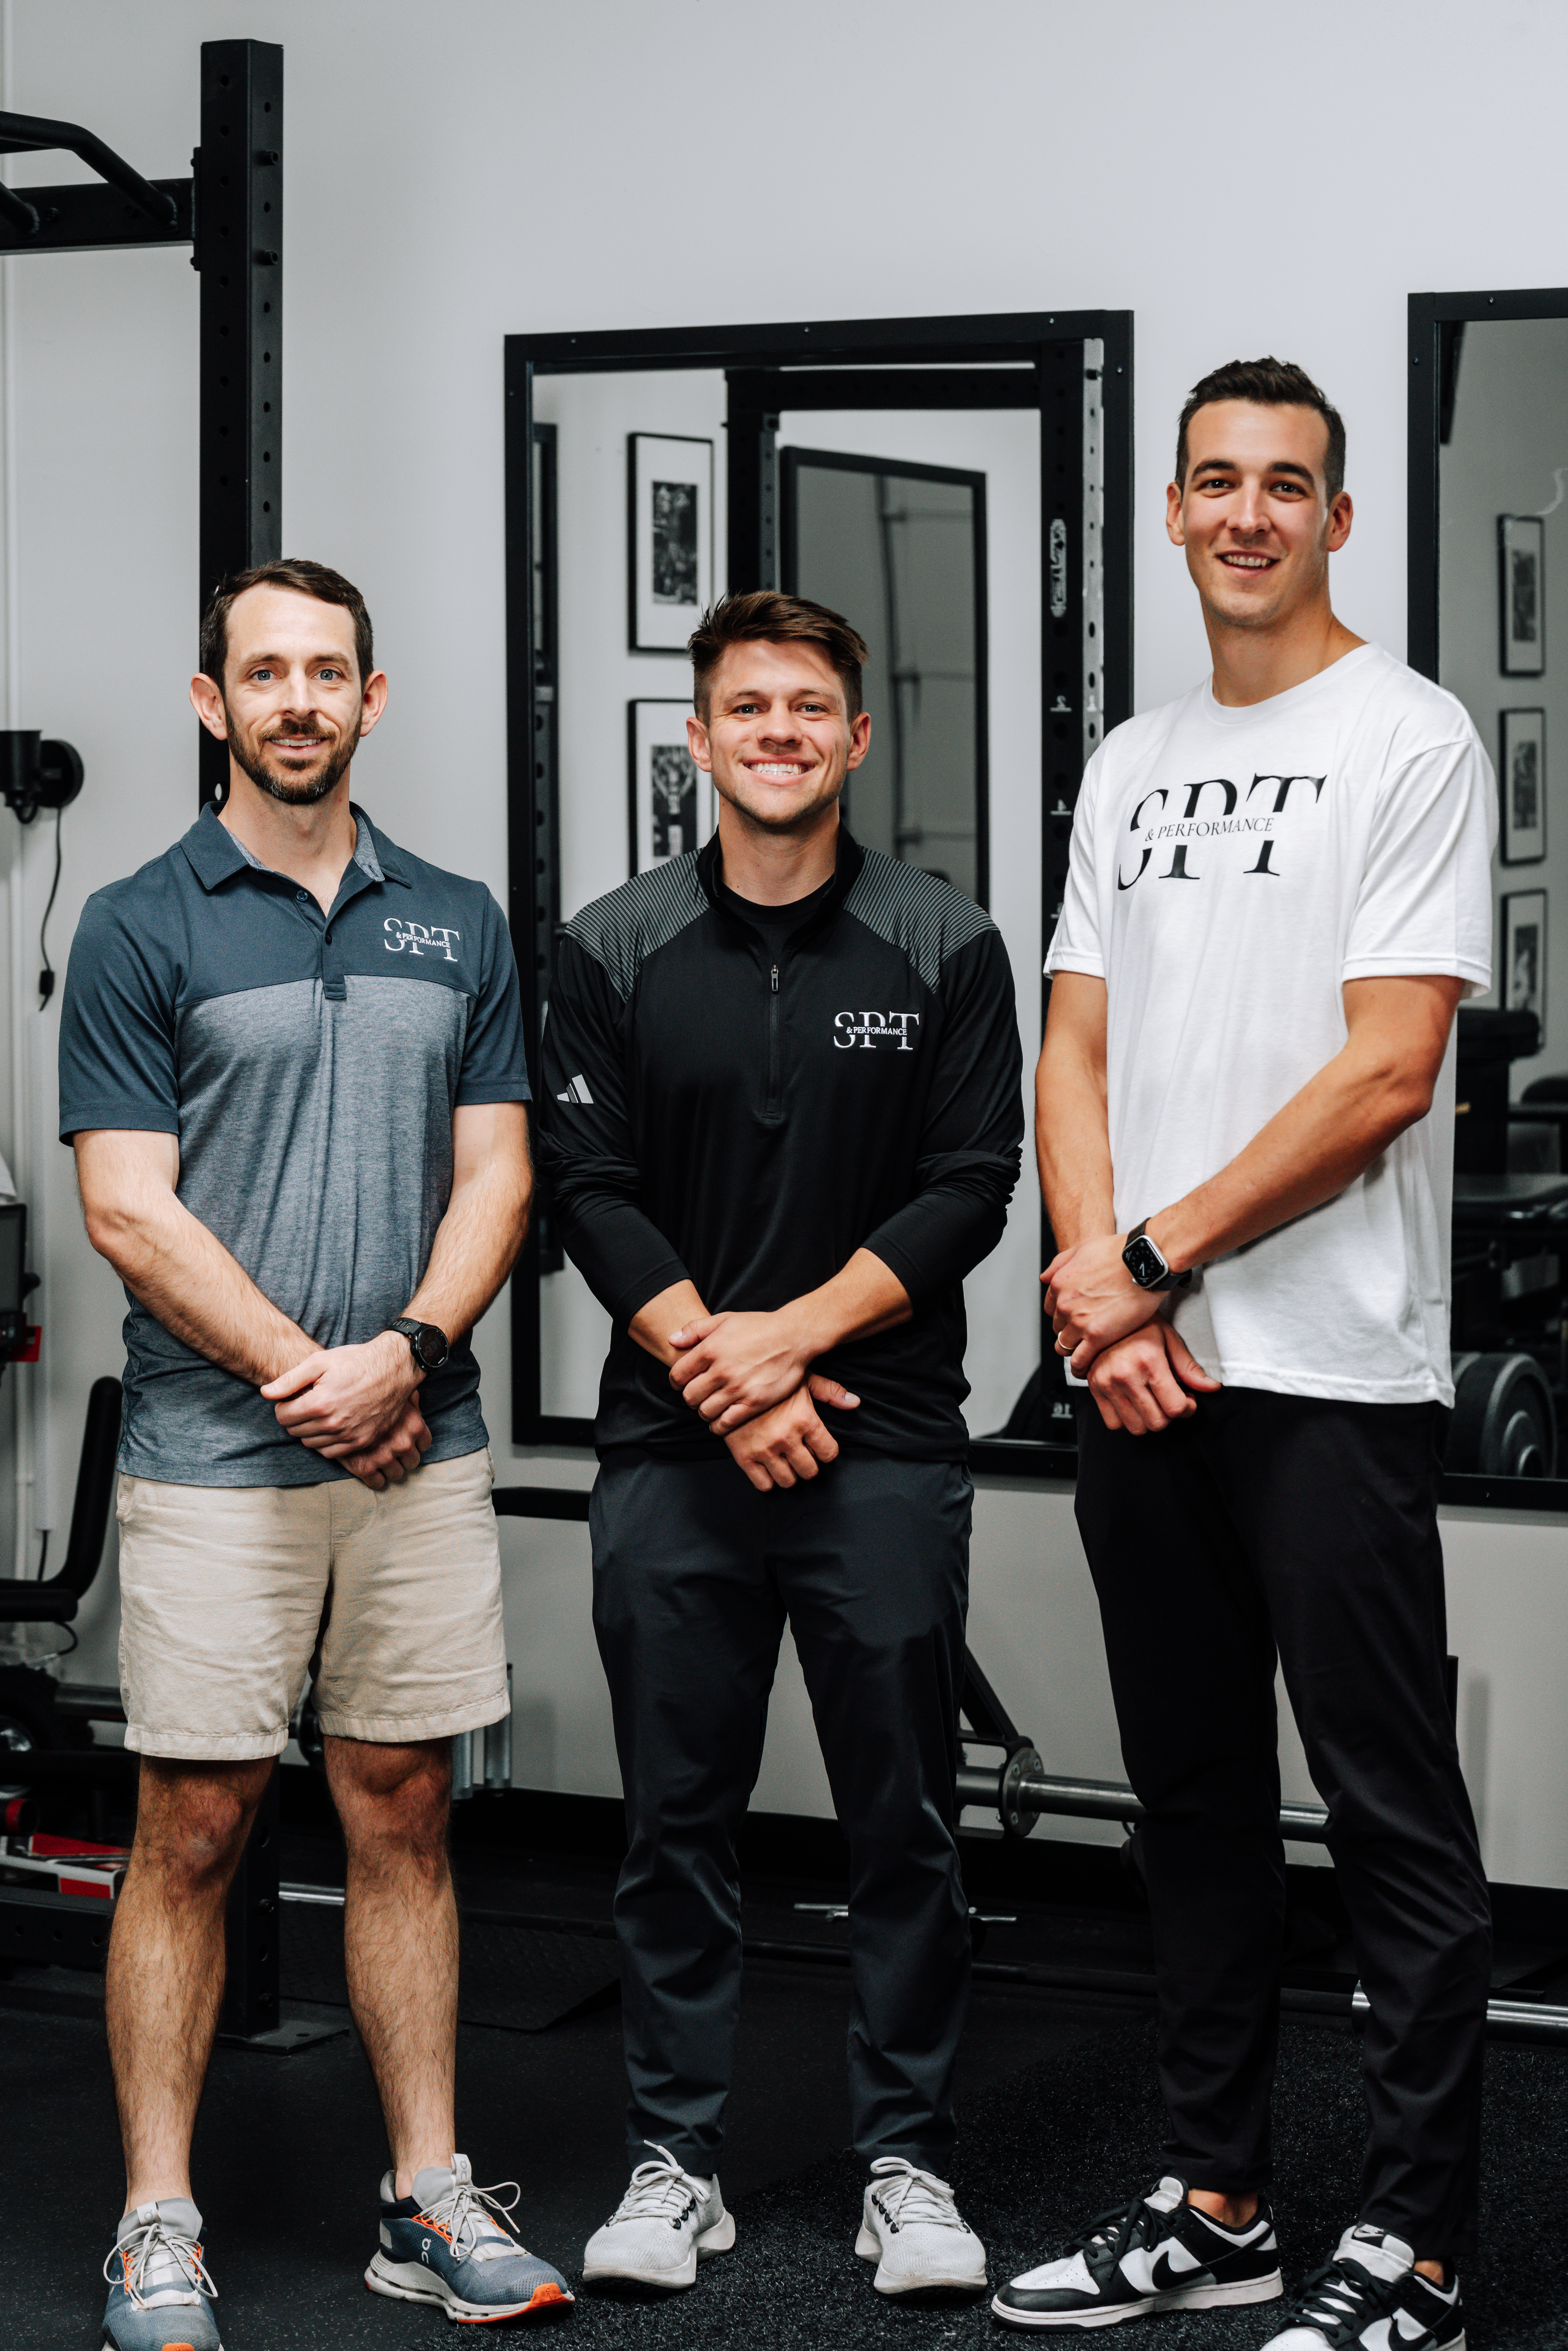 scottsdale-physical-therapy-near-me